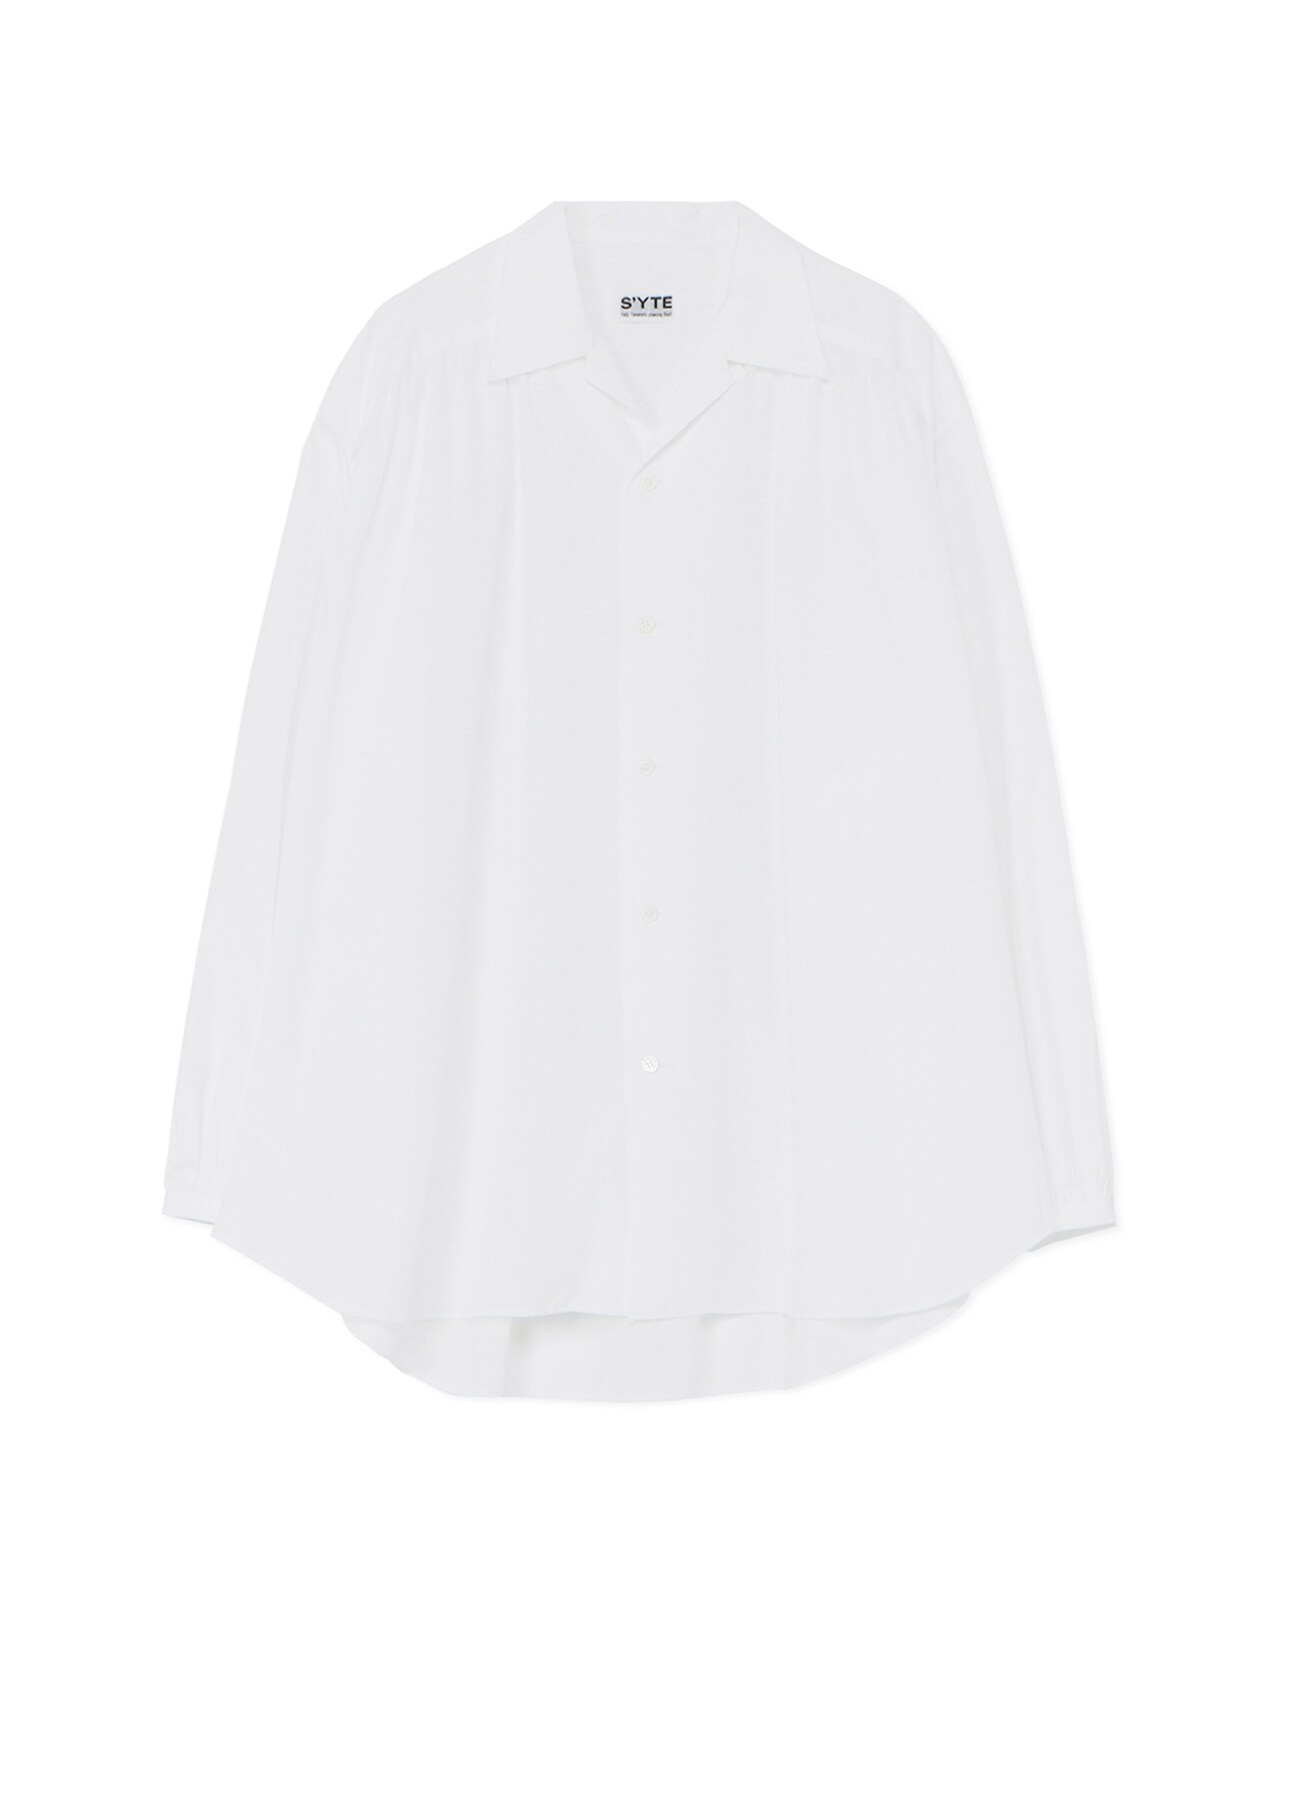 100/2 BROAD GATHERED BALLOON SHIRTS(M White): S'YTE｜THE SHOP